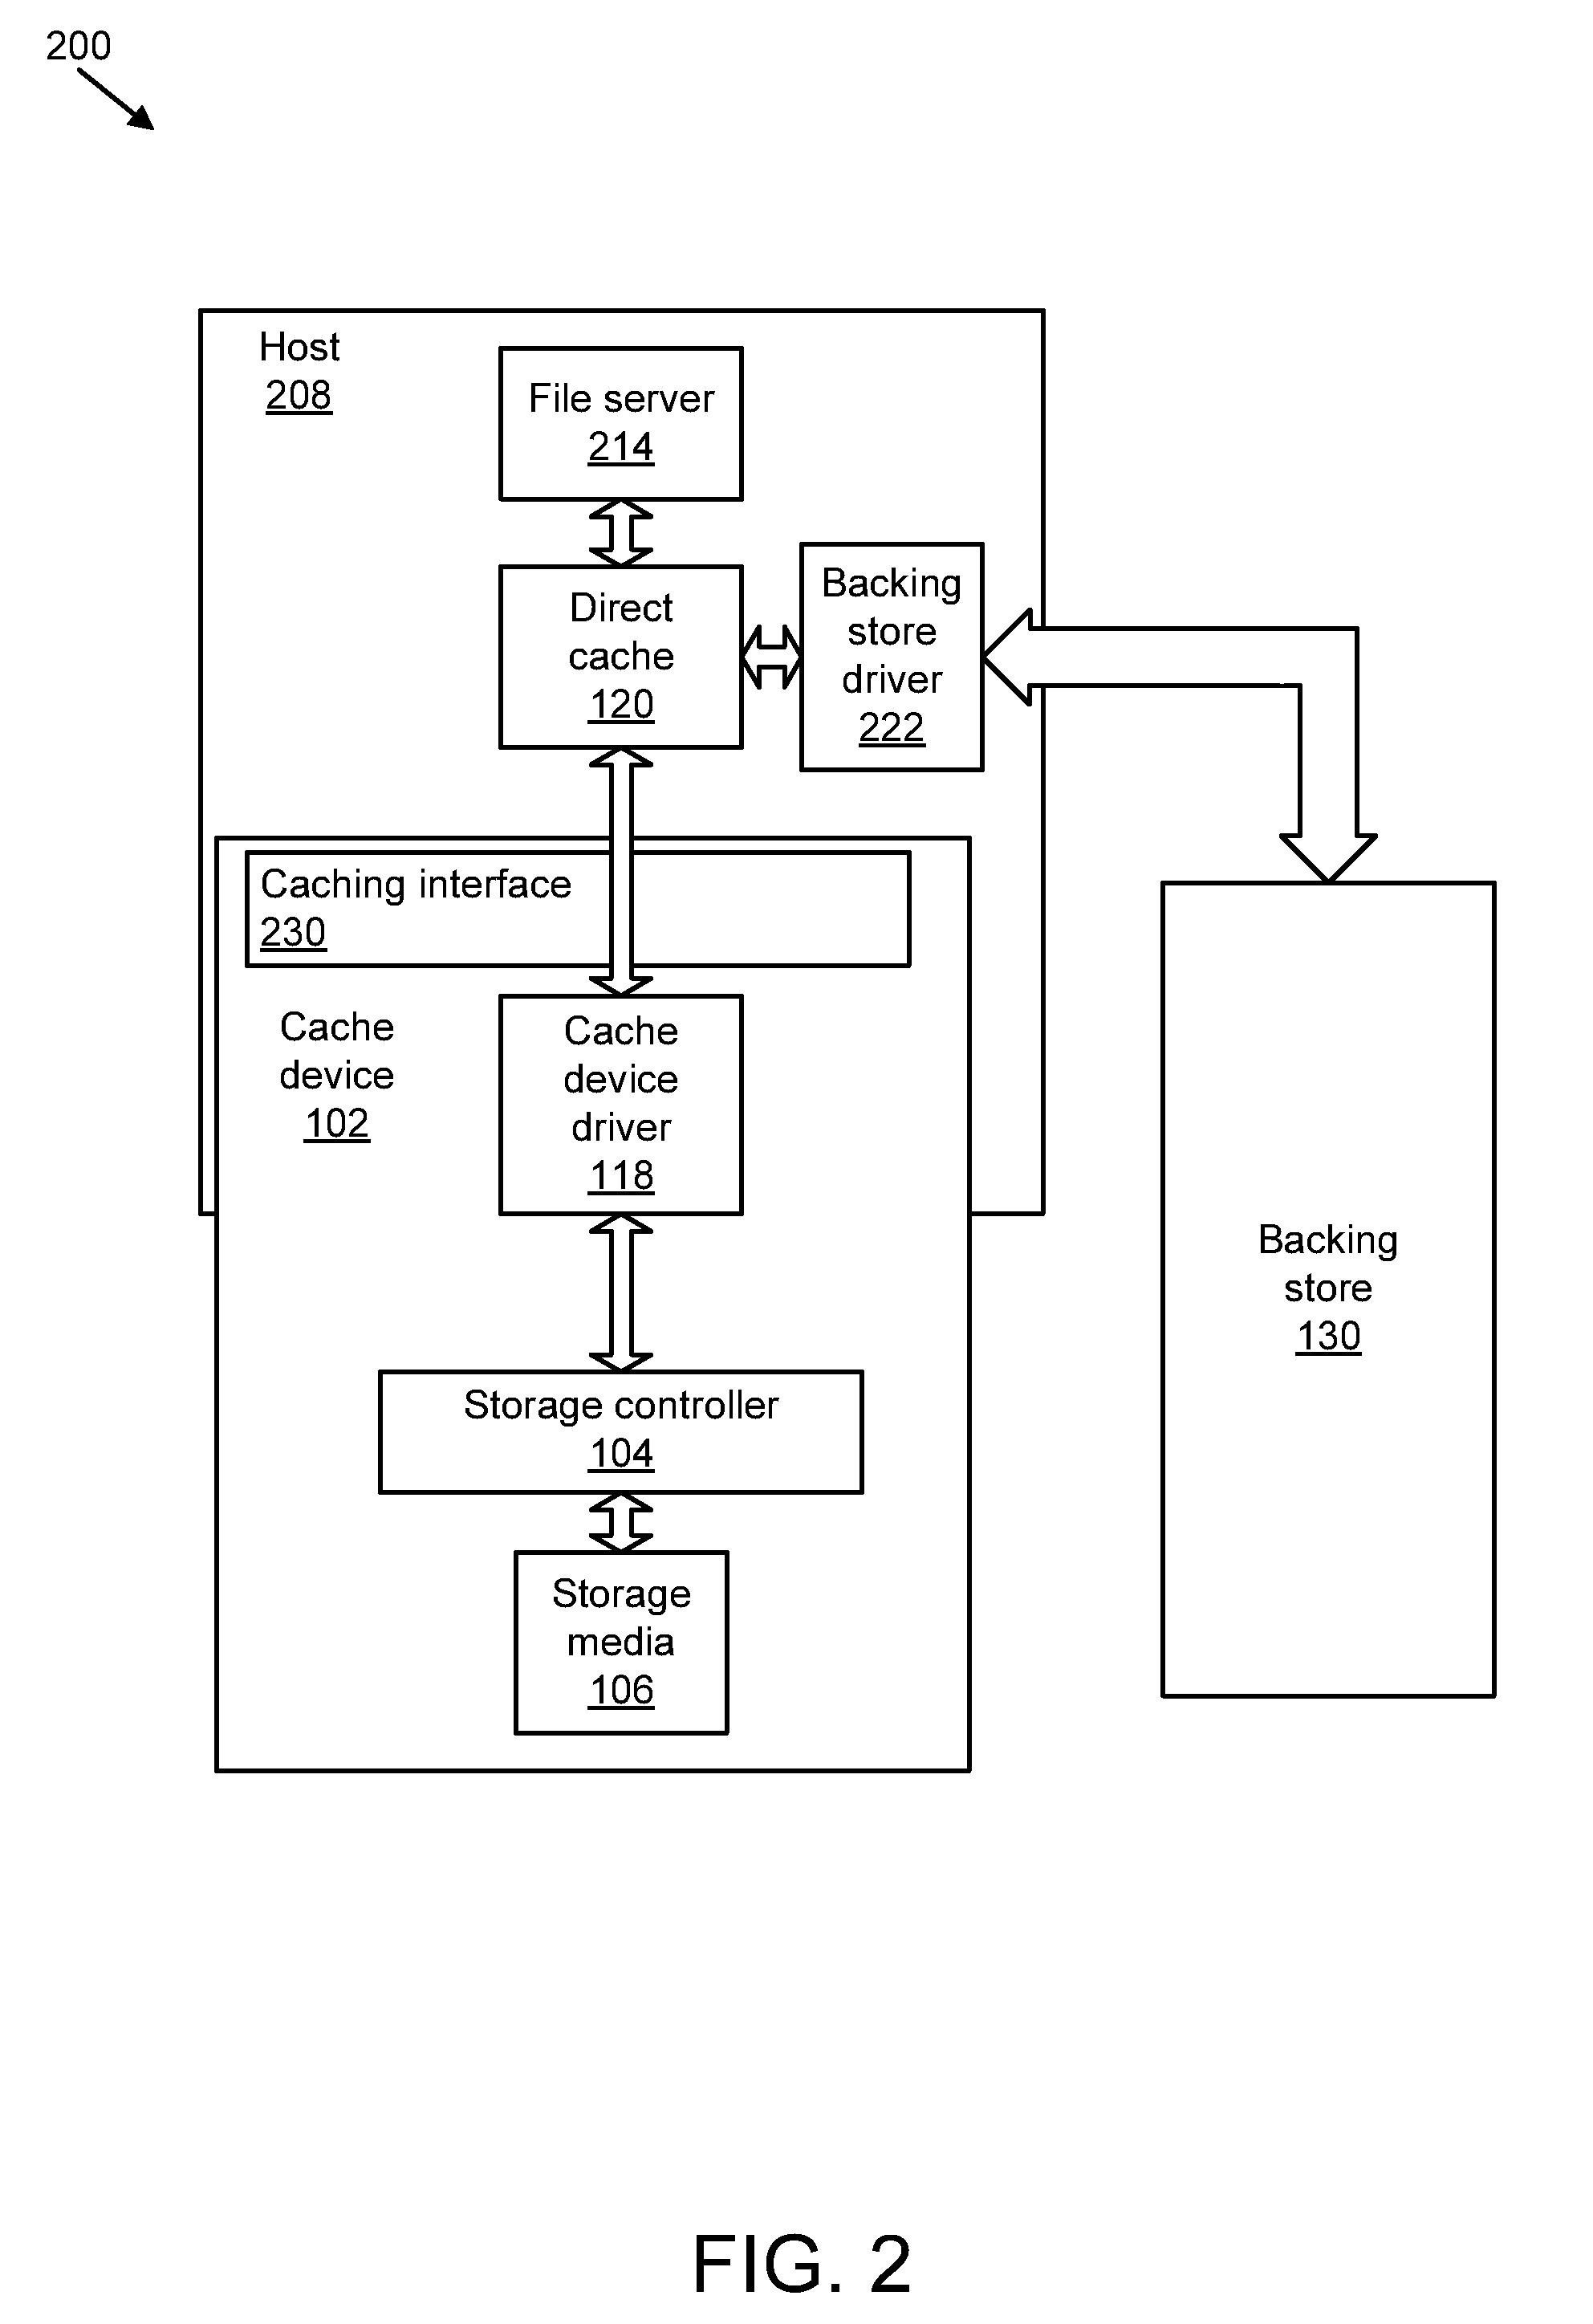 Apparatus, system, and method for graceful cache device degradation